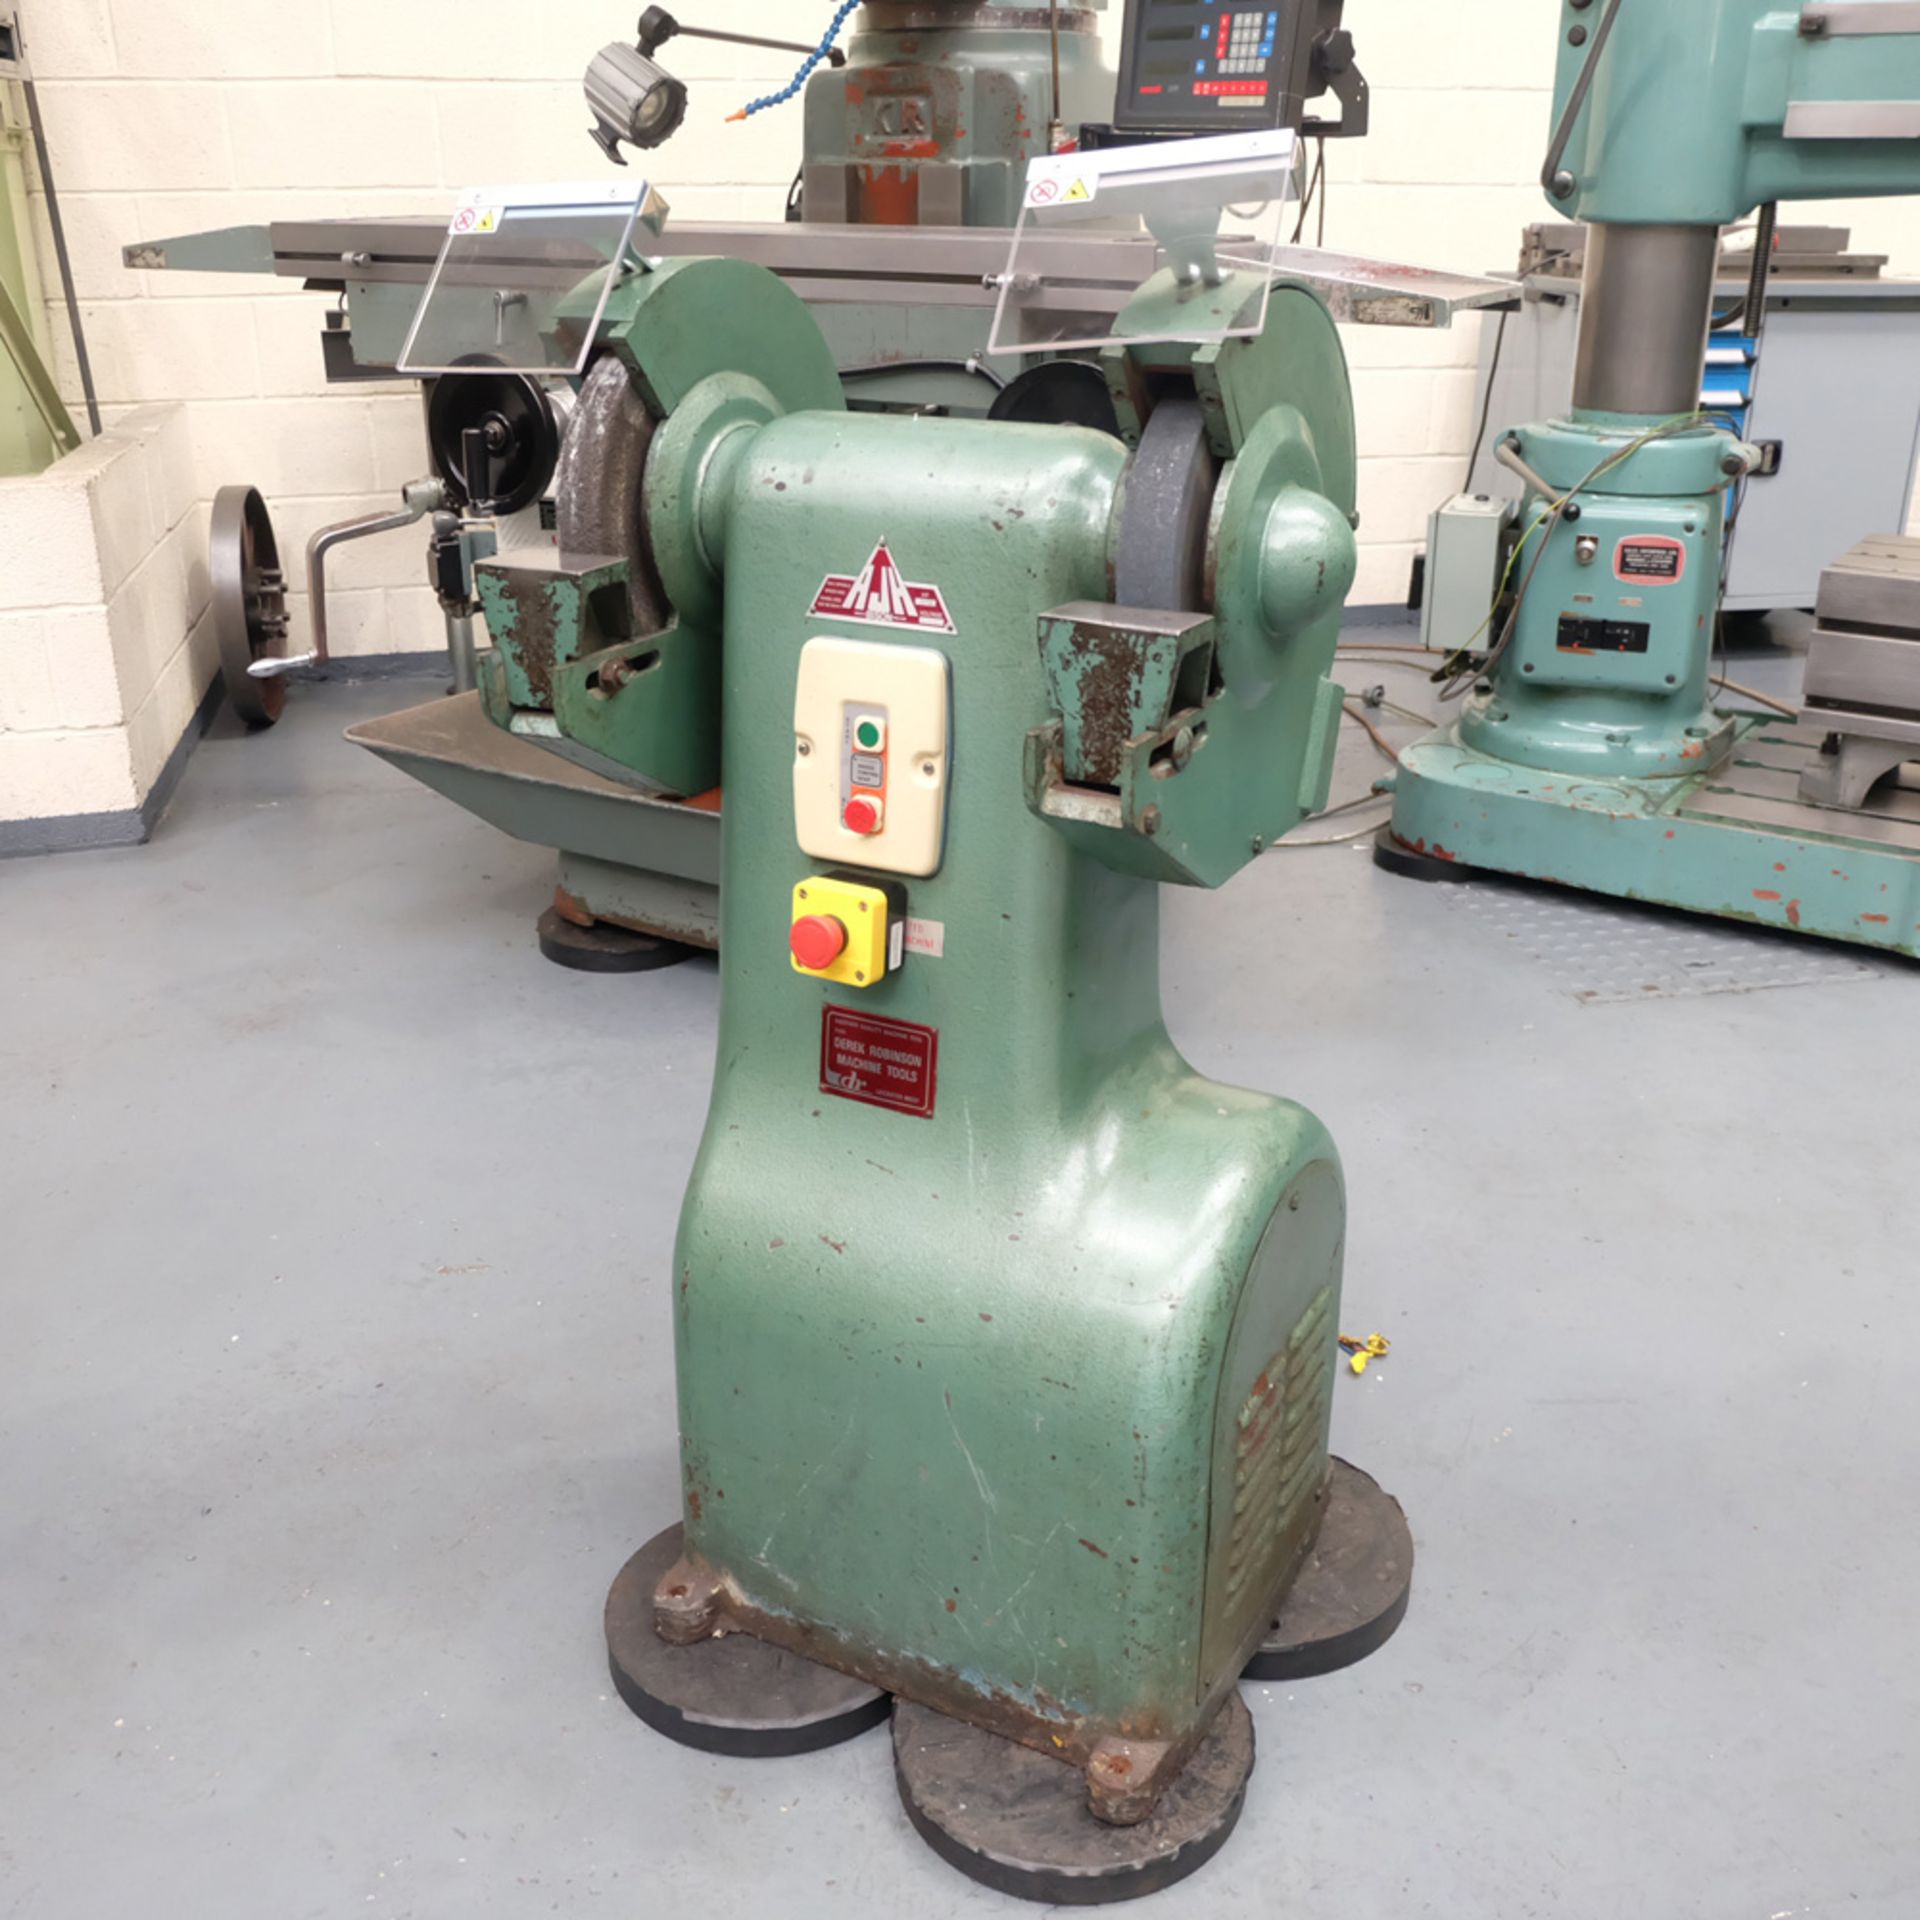 RJH Bison Double Ended Pedestal Tool Grinder. Wheel Size 300mm x 38mm x 35mm. Wheel Guards.